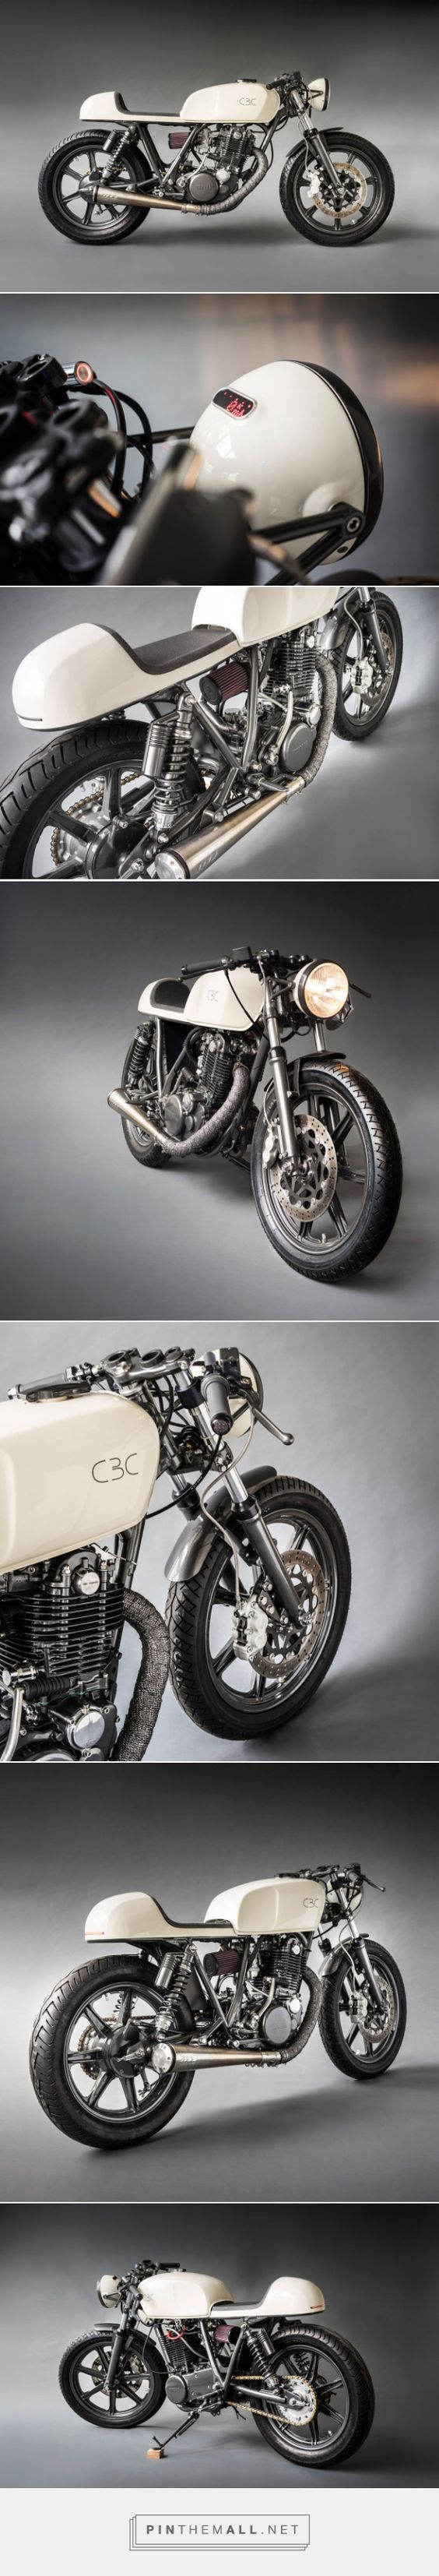 The cafe racer redefined: Yamaha's iconic SR500 Click to read the full story